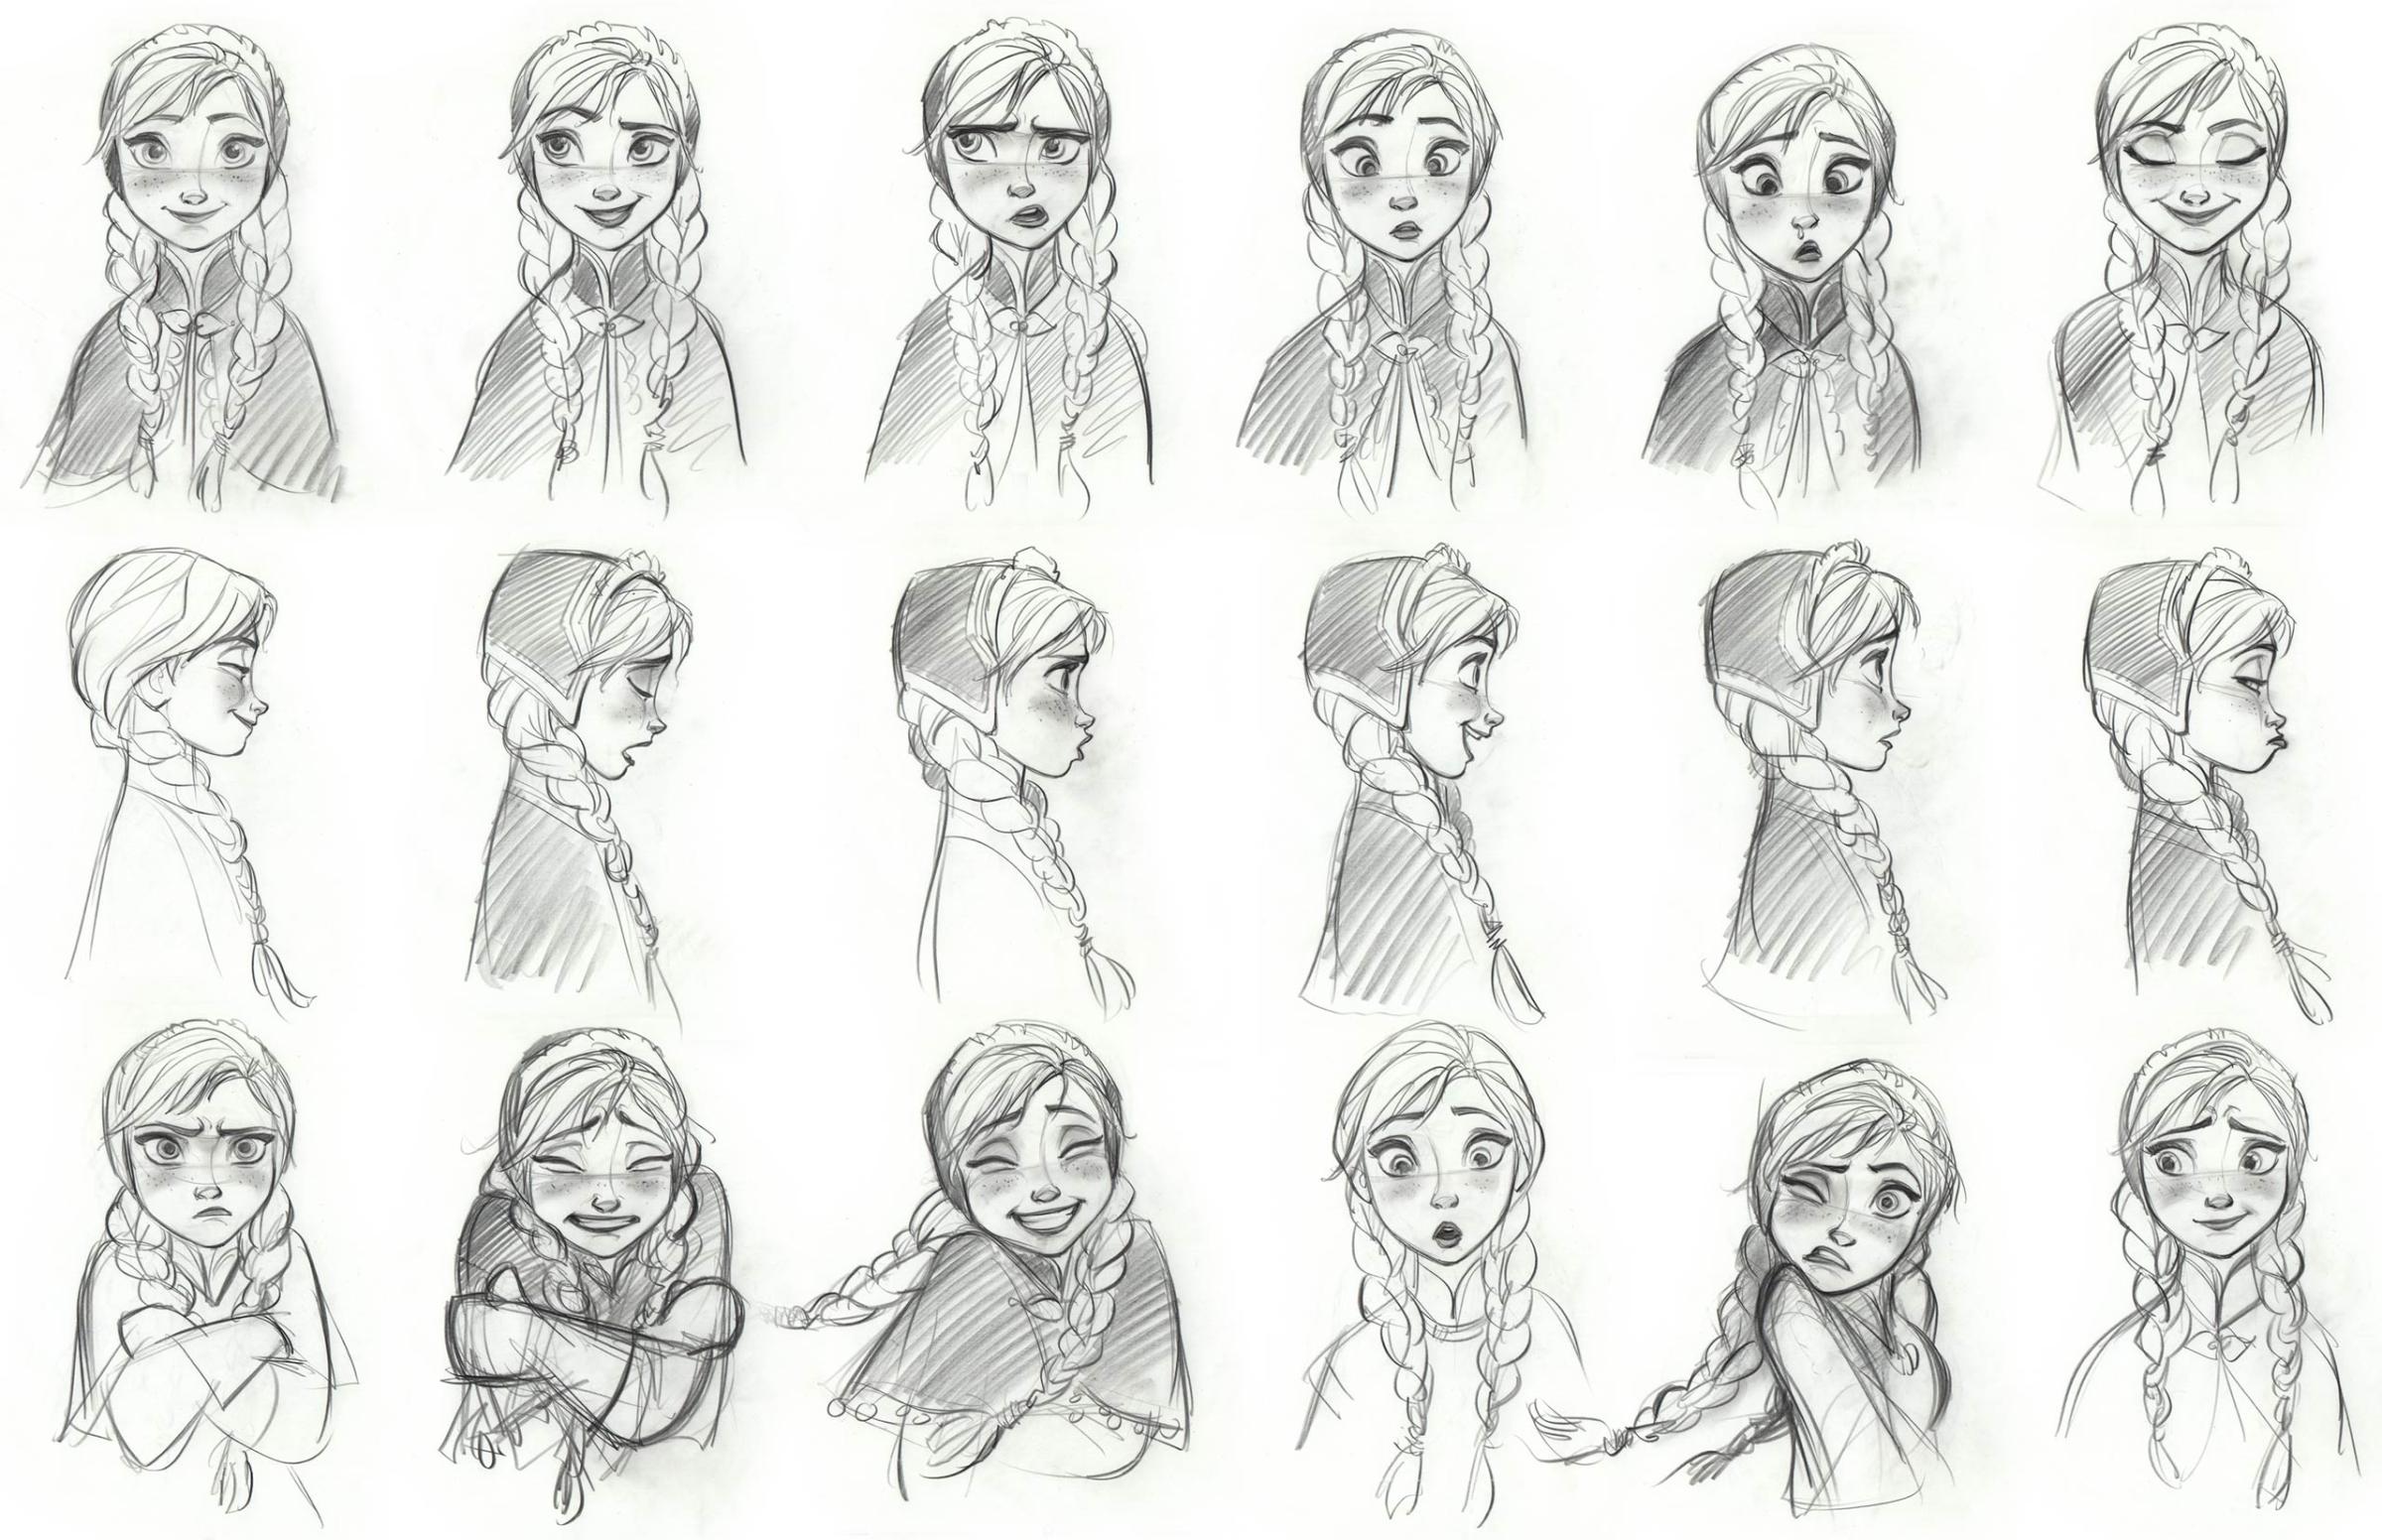 "FROZEN" Anna model sheet. ©2013 Disney. All Rights Reserved.